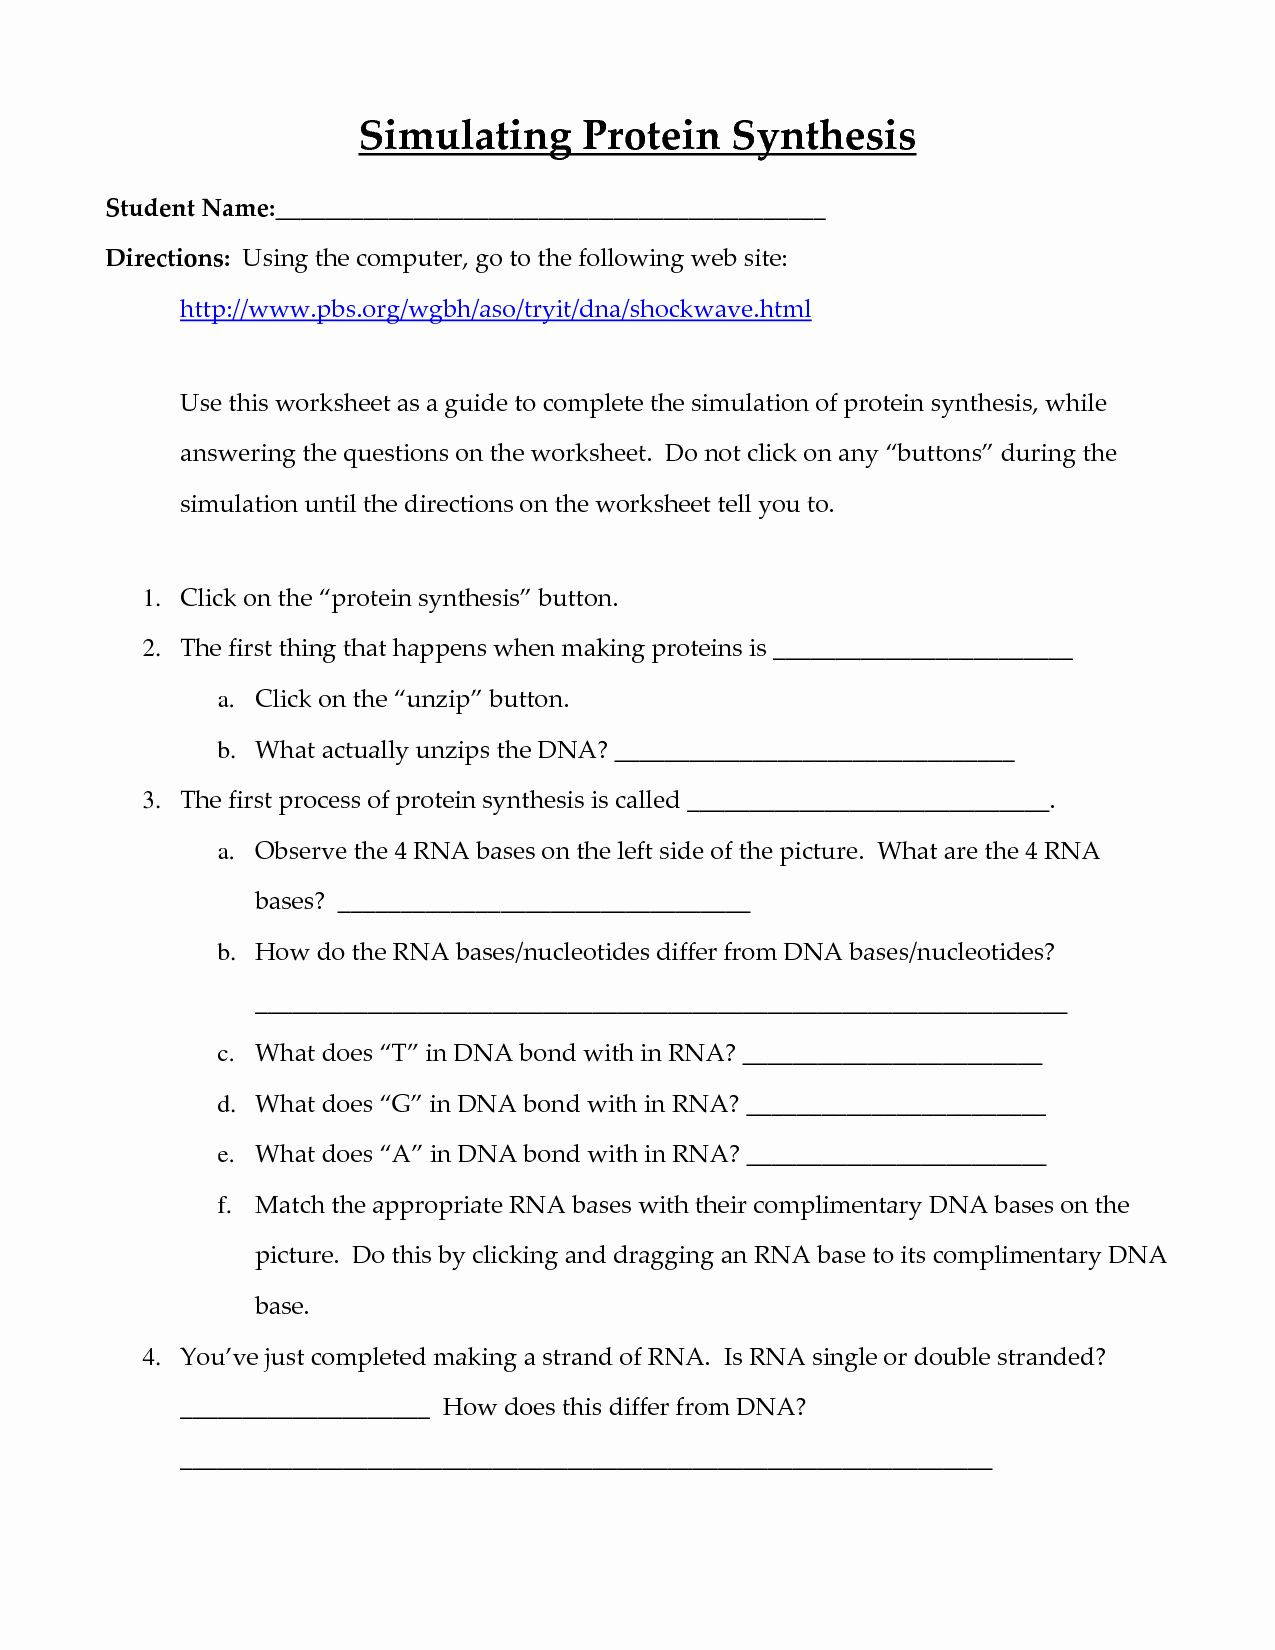 Dna and Rna Worksheet Answers Dna and Rna Worksheet Answers Elegant 16 Best Dna and Rna